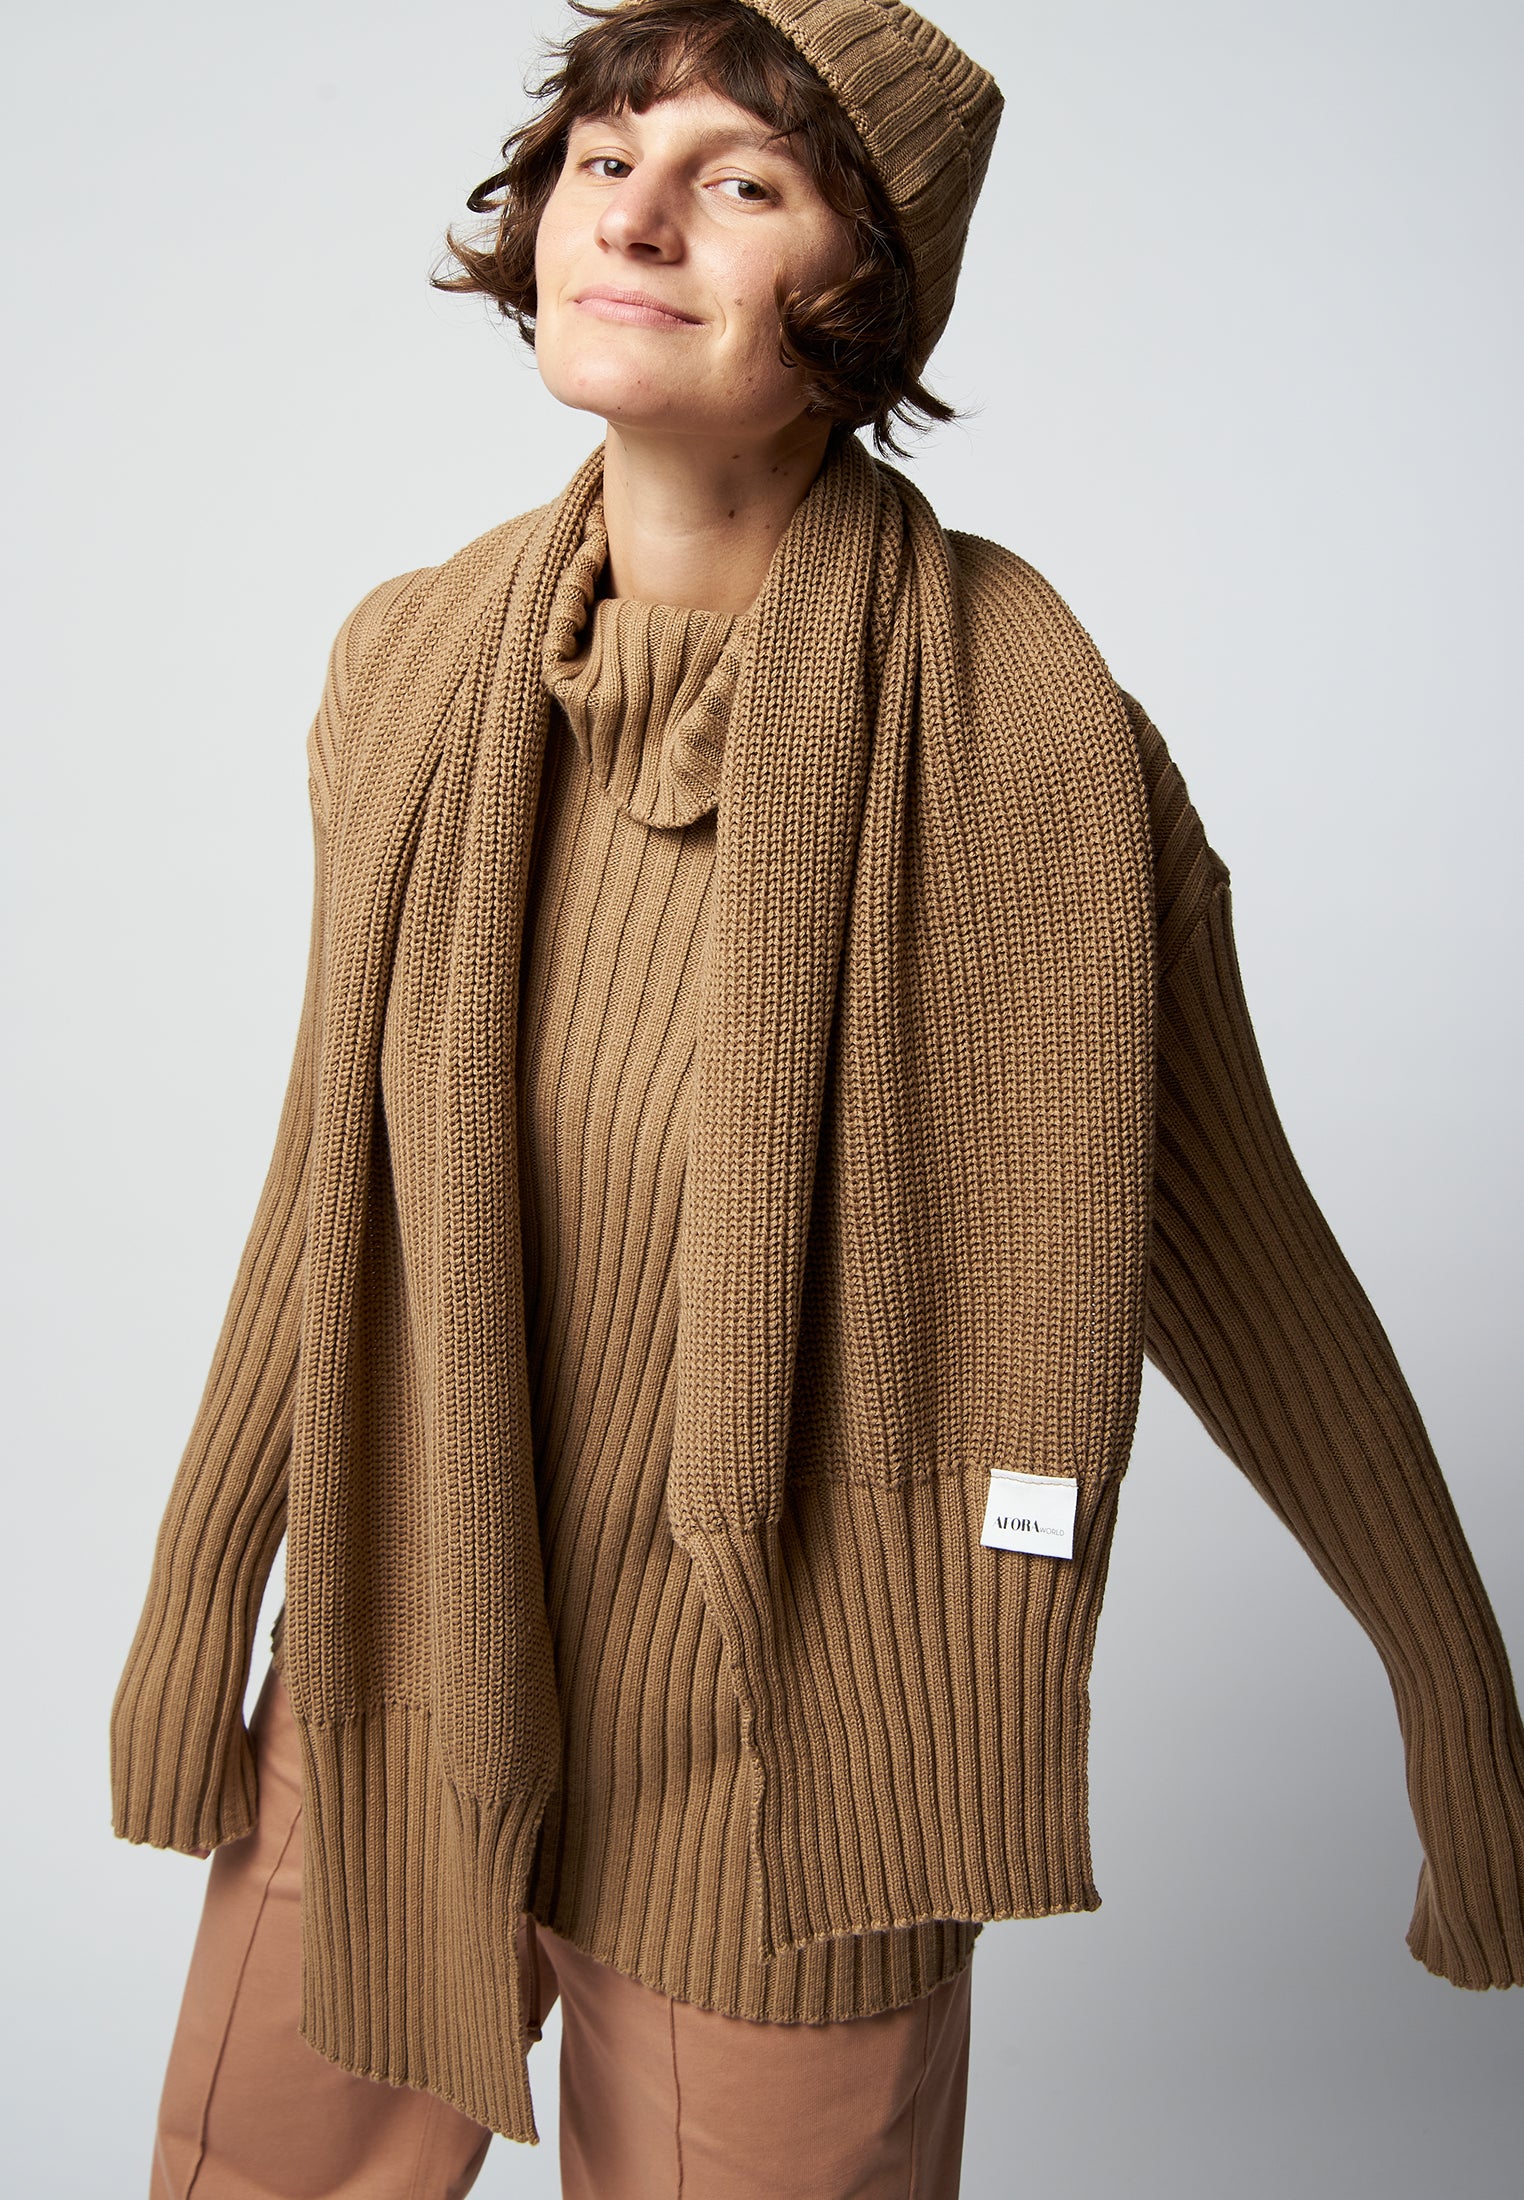 COMBI: Organic cotton knit hat and knit scarf in brown